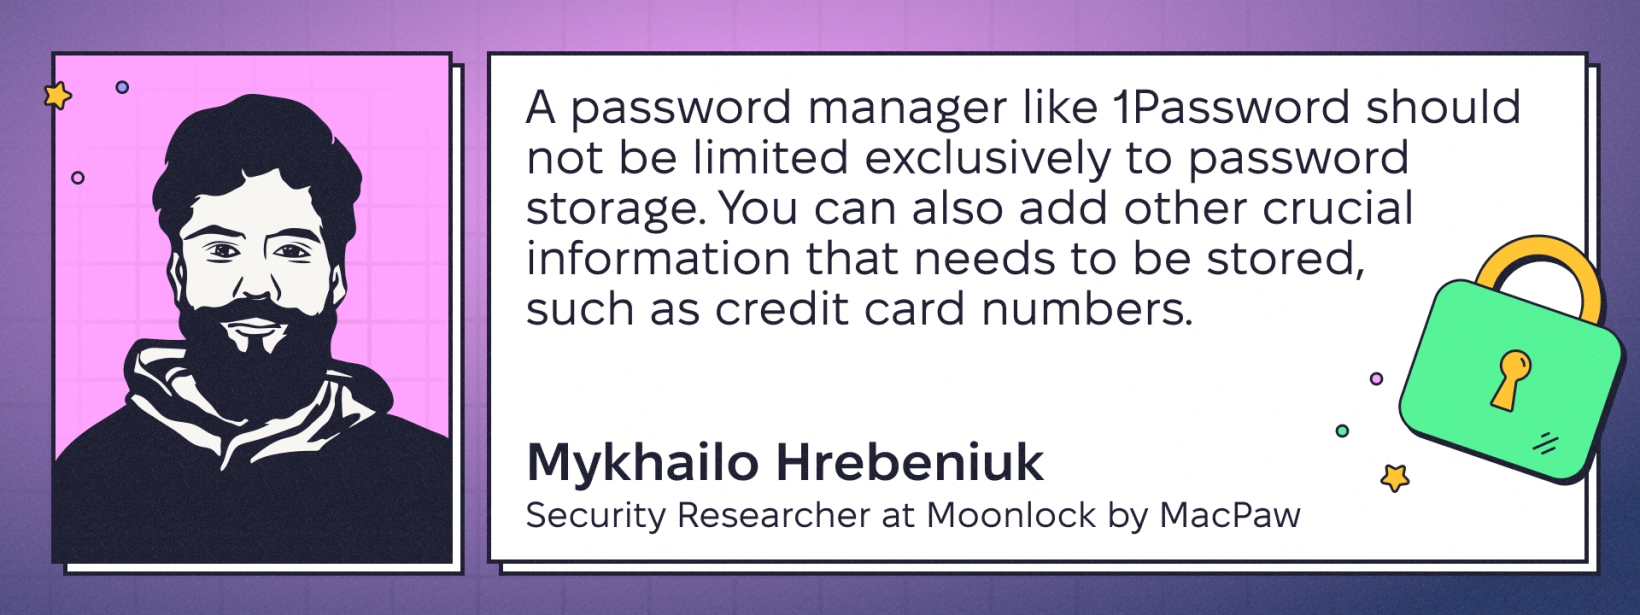 Quote by Mykhailo Hrebeniuk, Security Researcher at Moonlock by MacPaw: “A password manager like 1Password should not be limited exclusively to password storage. You can also add other crucial information that needs to be stored, such as credit card numbers.”